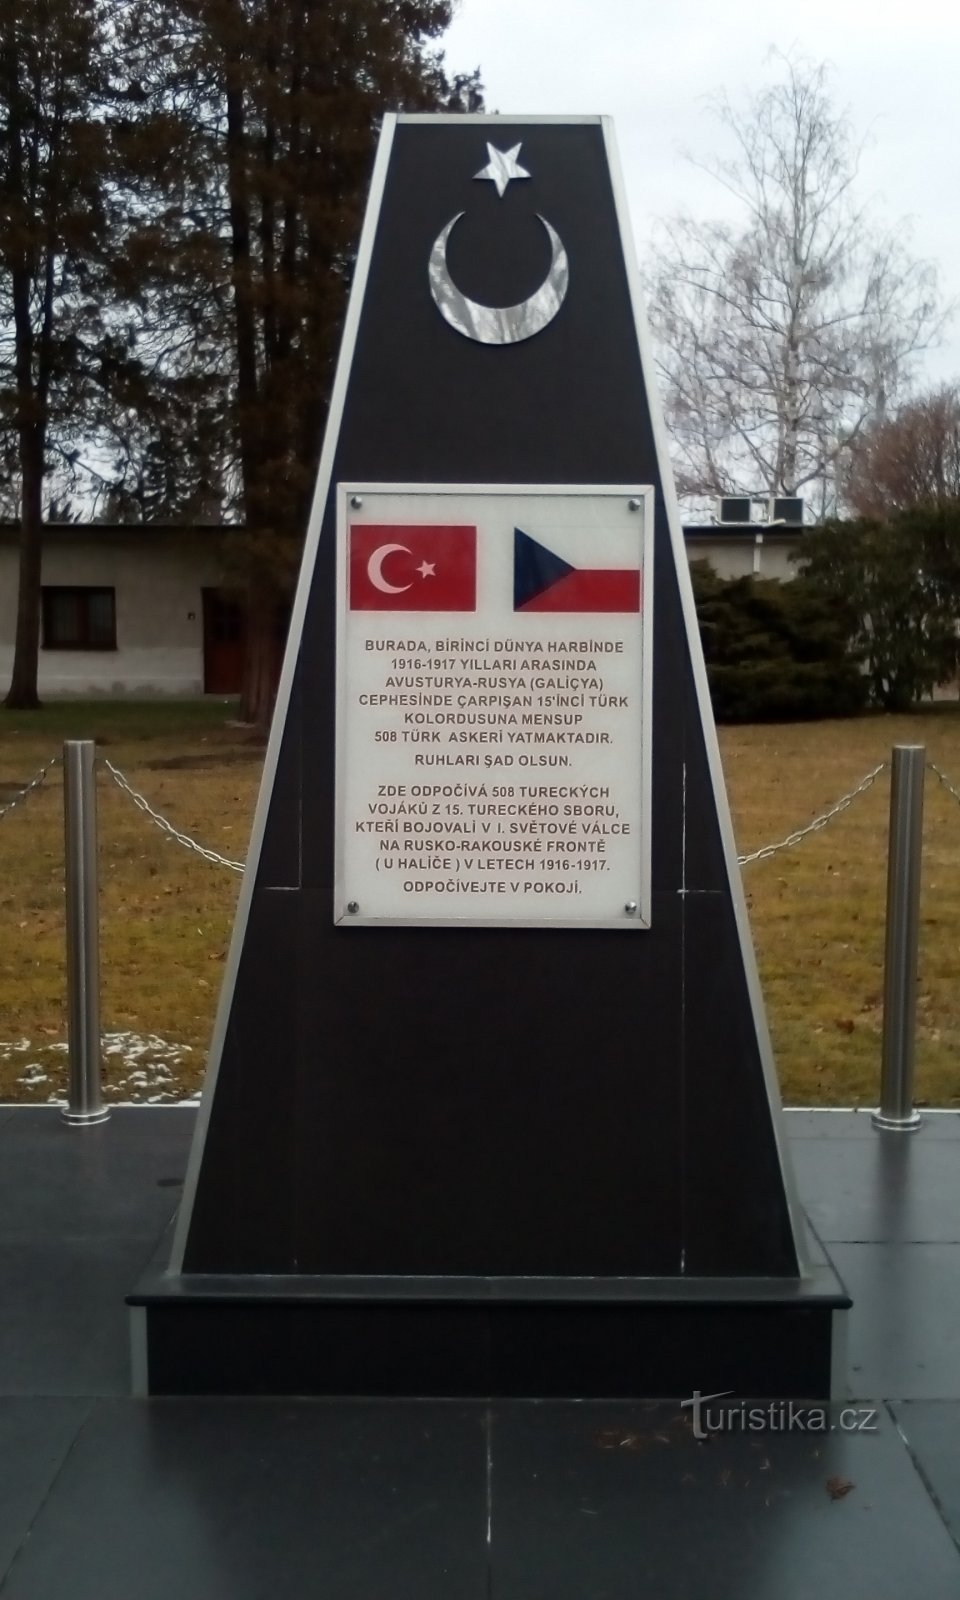 Monument to fallen Turkish soldiers from the First World War